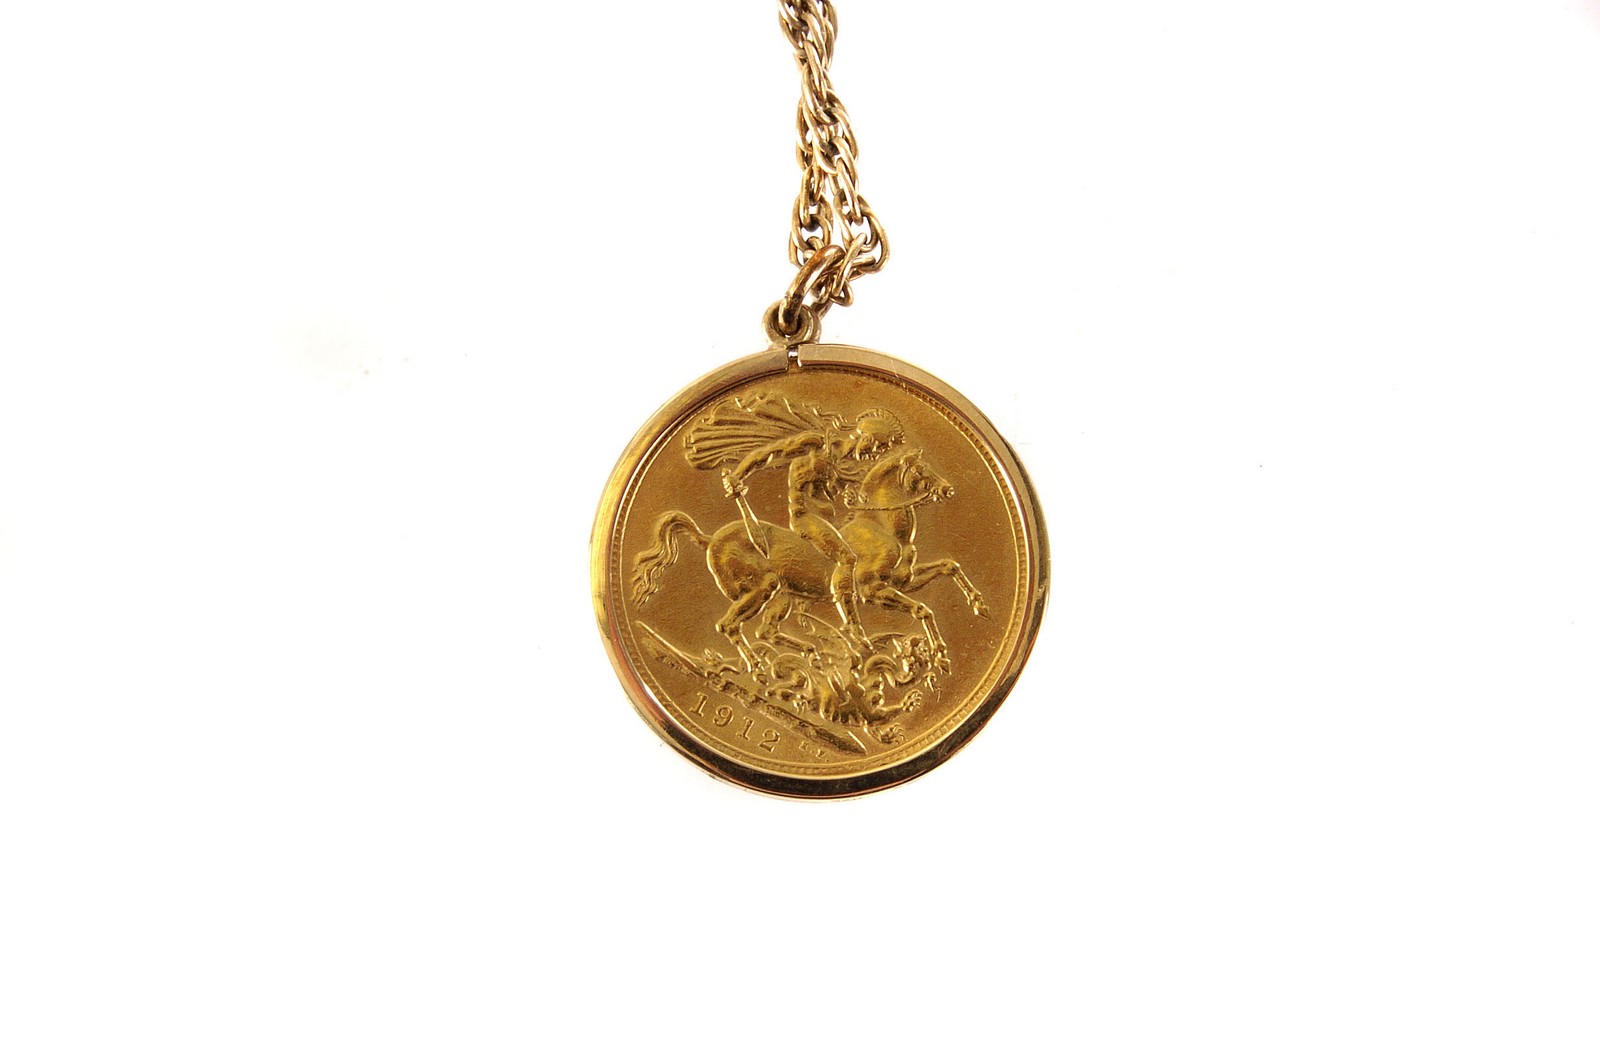 A George V full sovereign pendant, dated 1912, with 9ct gold mount and chain, approx 17g